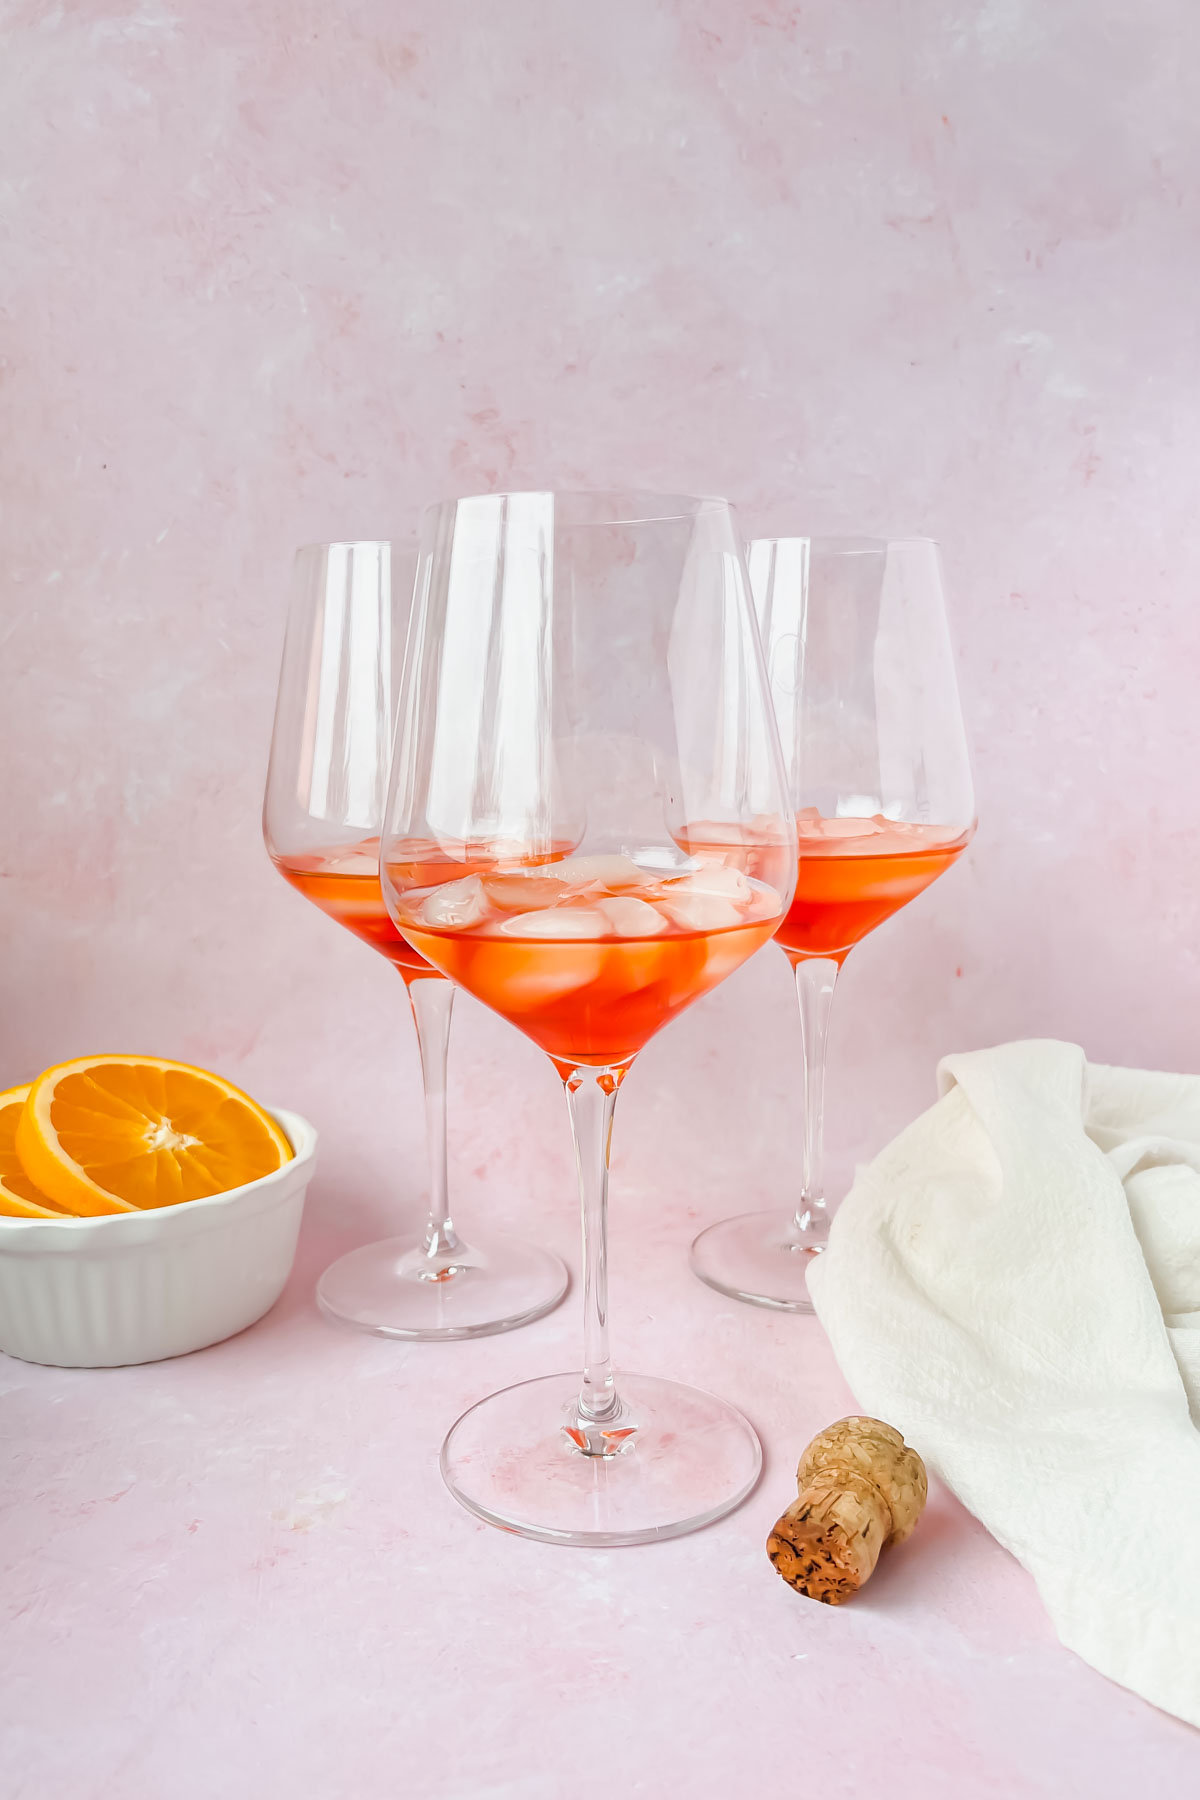 three wine glasses filled with ice and aperol.